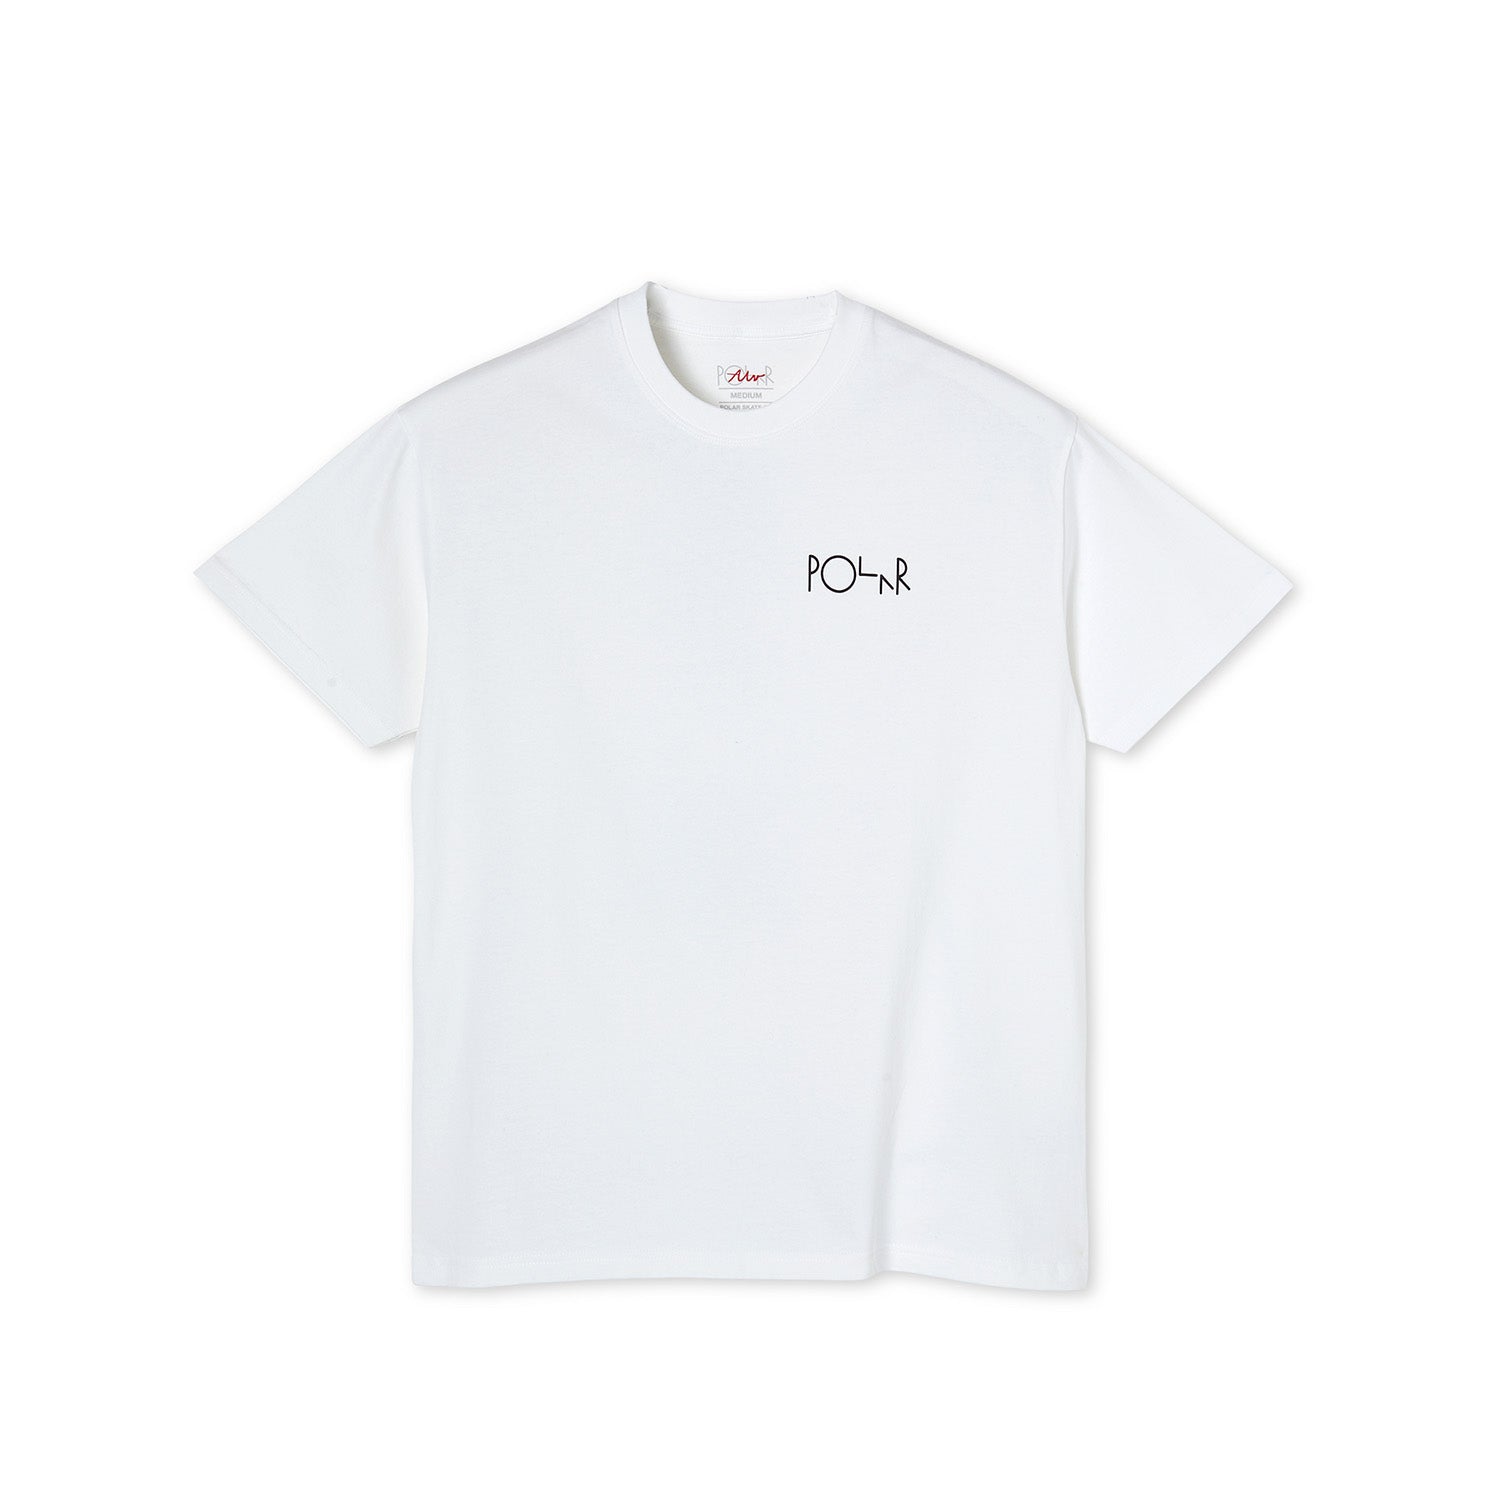 No Complies Forever Tee, White